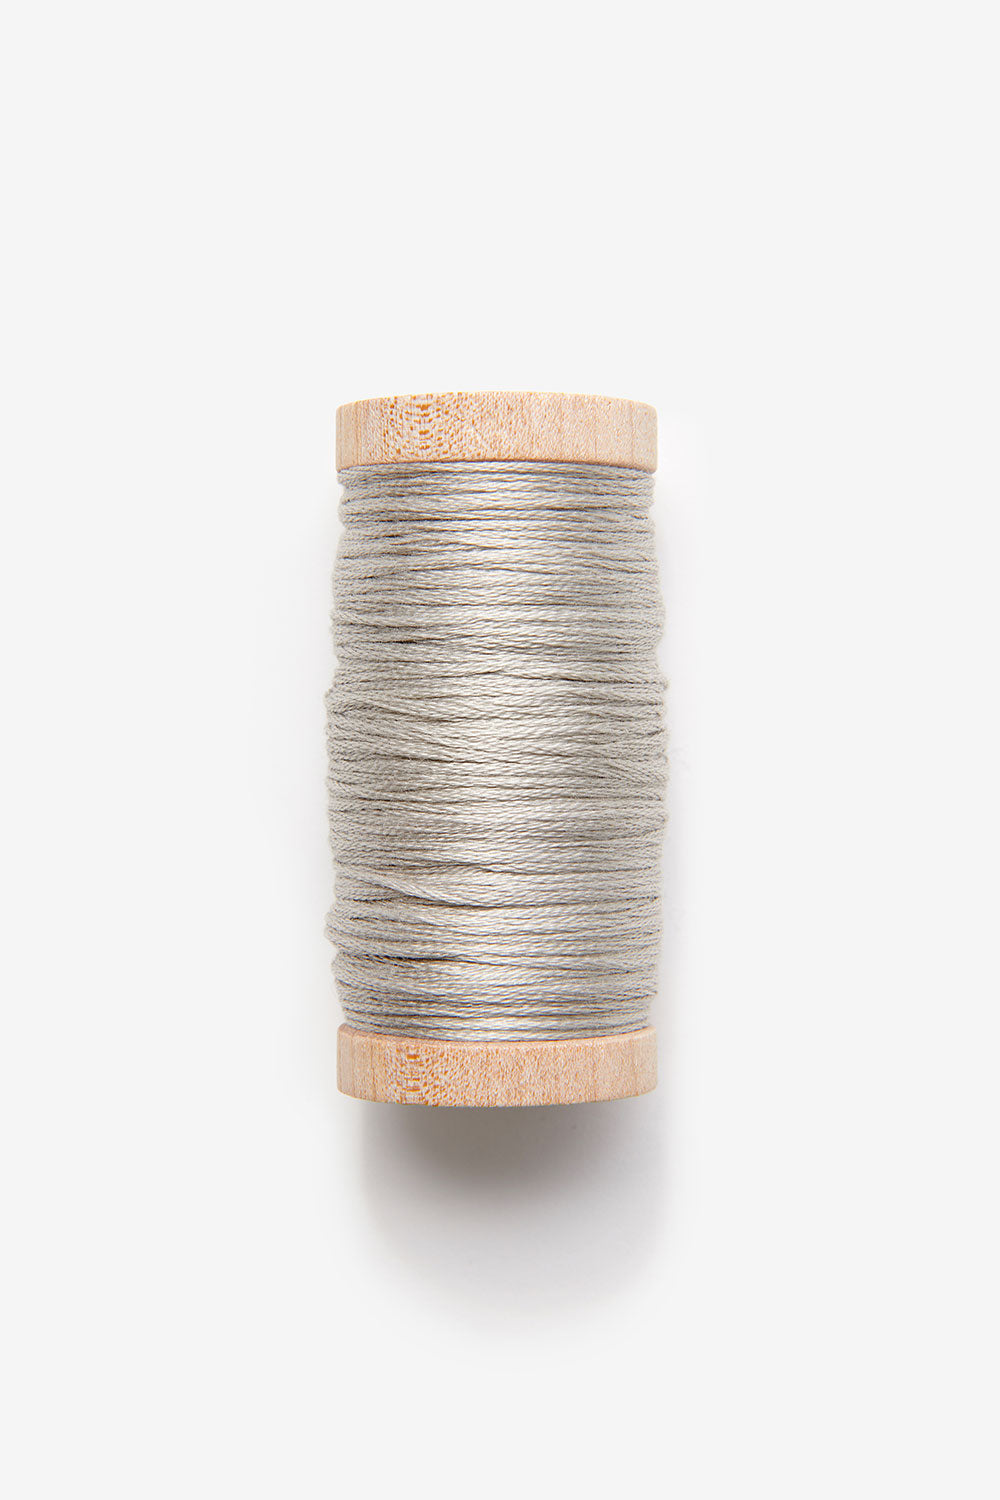 The School of Making Embroidery Floss Spool in Neutral Silt Grey